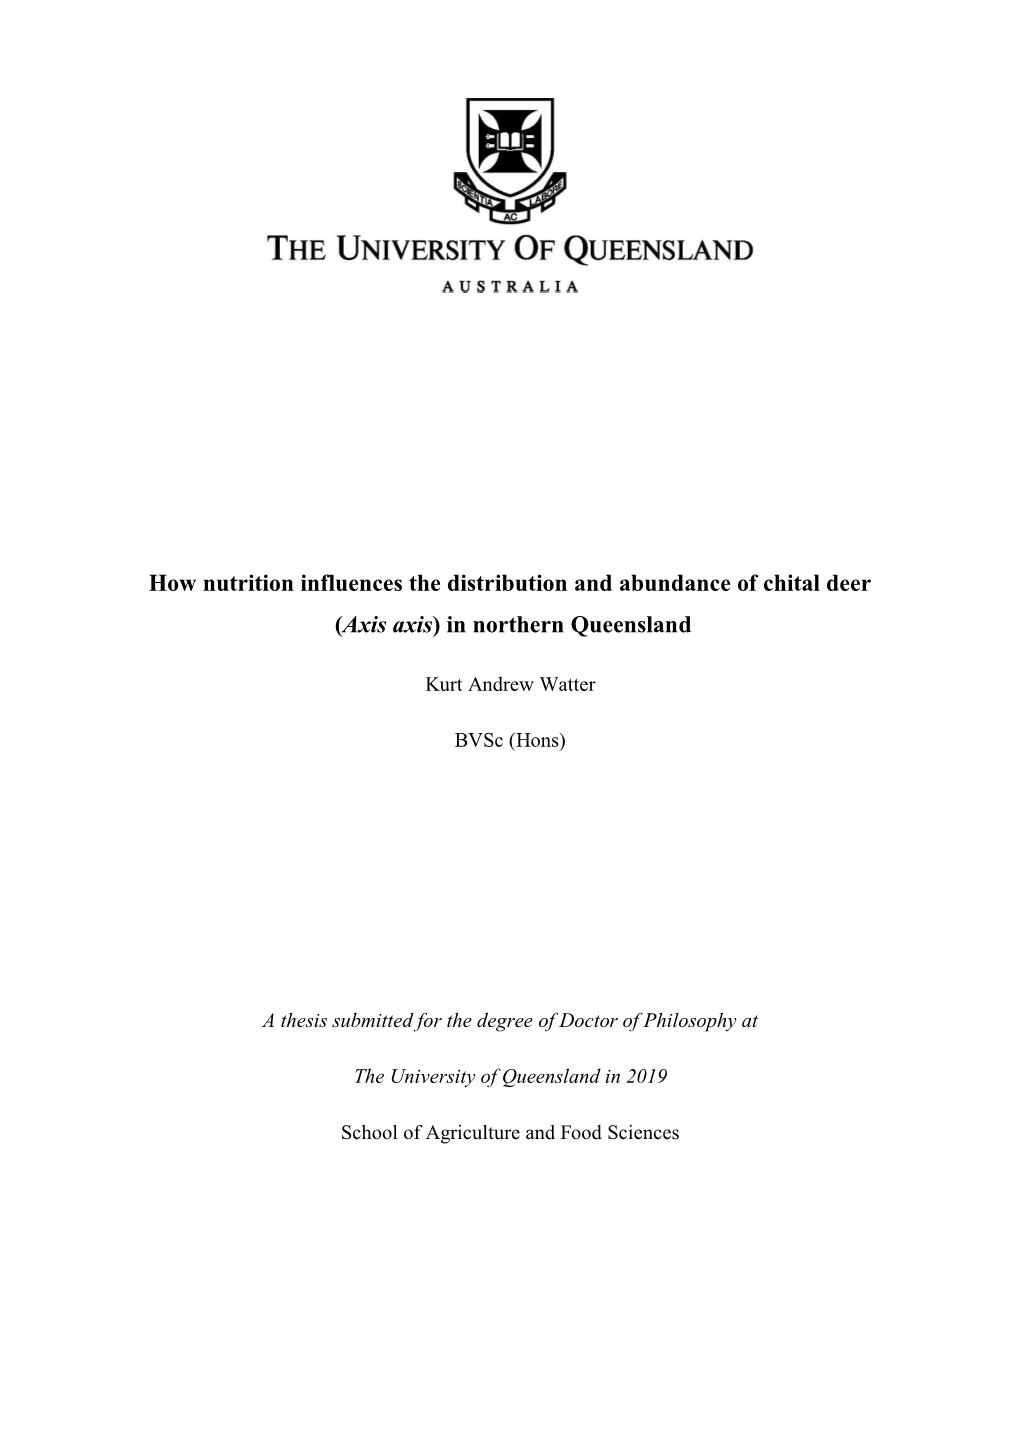 How Nutrition Influences the Distribution and Abundance of Chital Deer (Axis Axis) in Northern Queensland